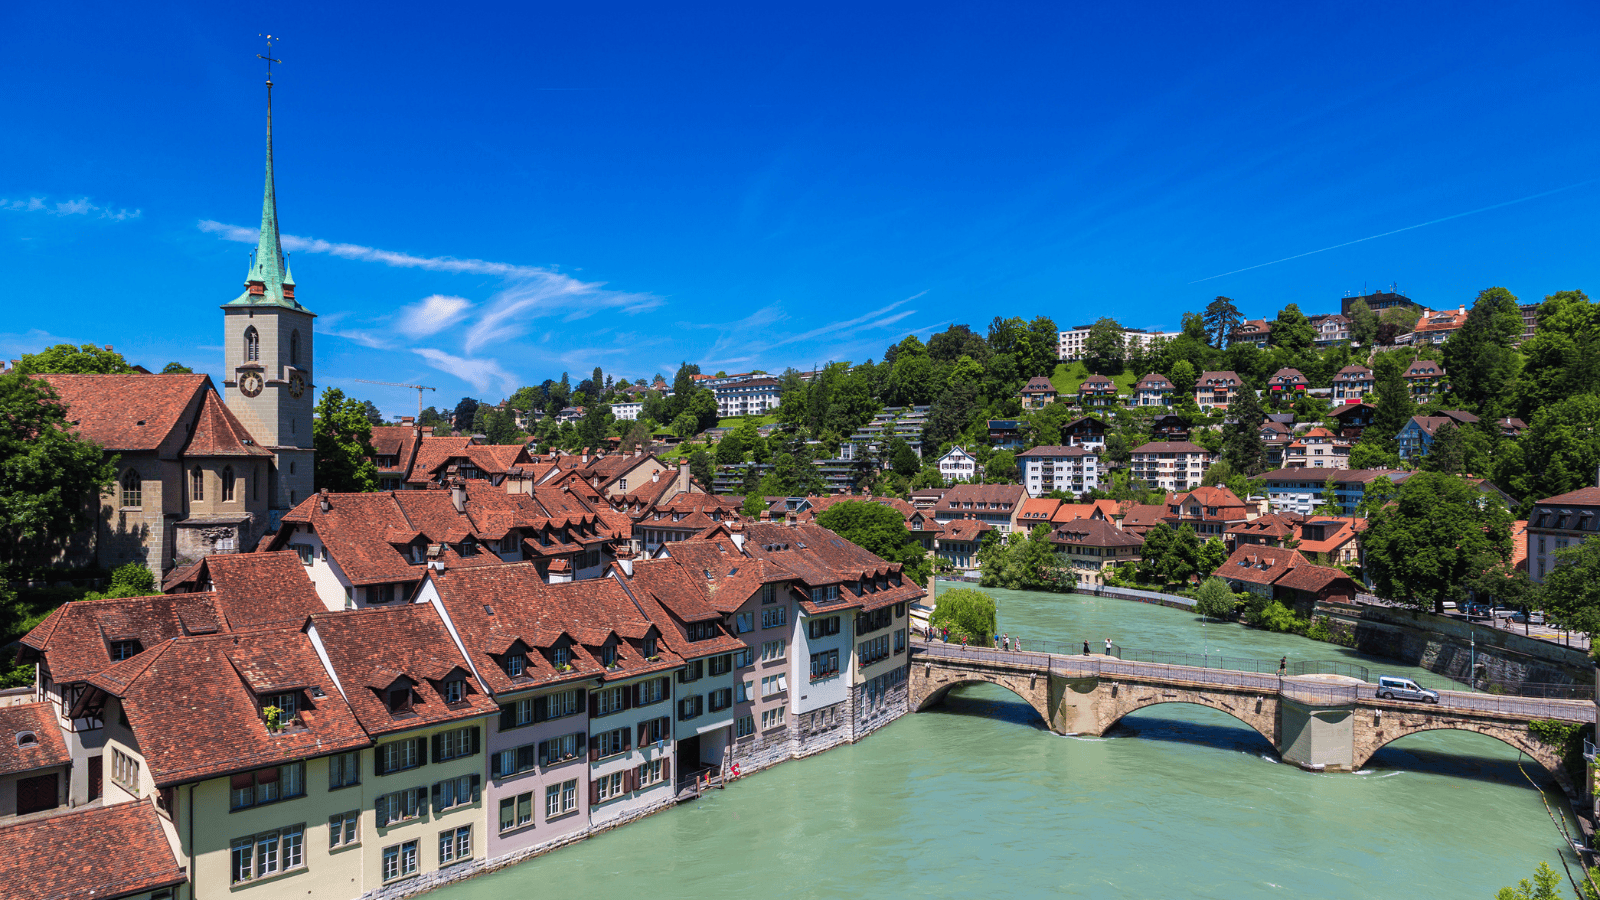 <p>Don’t let the cobblestone streets stop you from visiting the Swiss town of Bern. This charming riverside locale has a rich cultural heritage dating back to the 12th century.</p><p>The Old Town, a <a href="https://whatthefab.com/bucket-list-unesco-world-heritage-sites.html" rel="follow">UNESCO World Heritage Site</a>, has many inclusive accommodations. Its streets are wide with minimal hills, and the cobblestones are relatively smooth.</p>